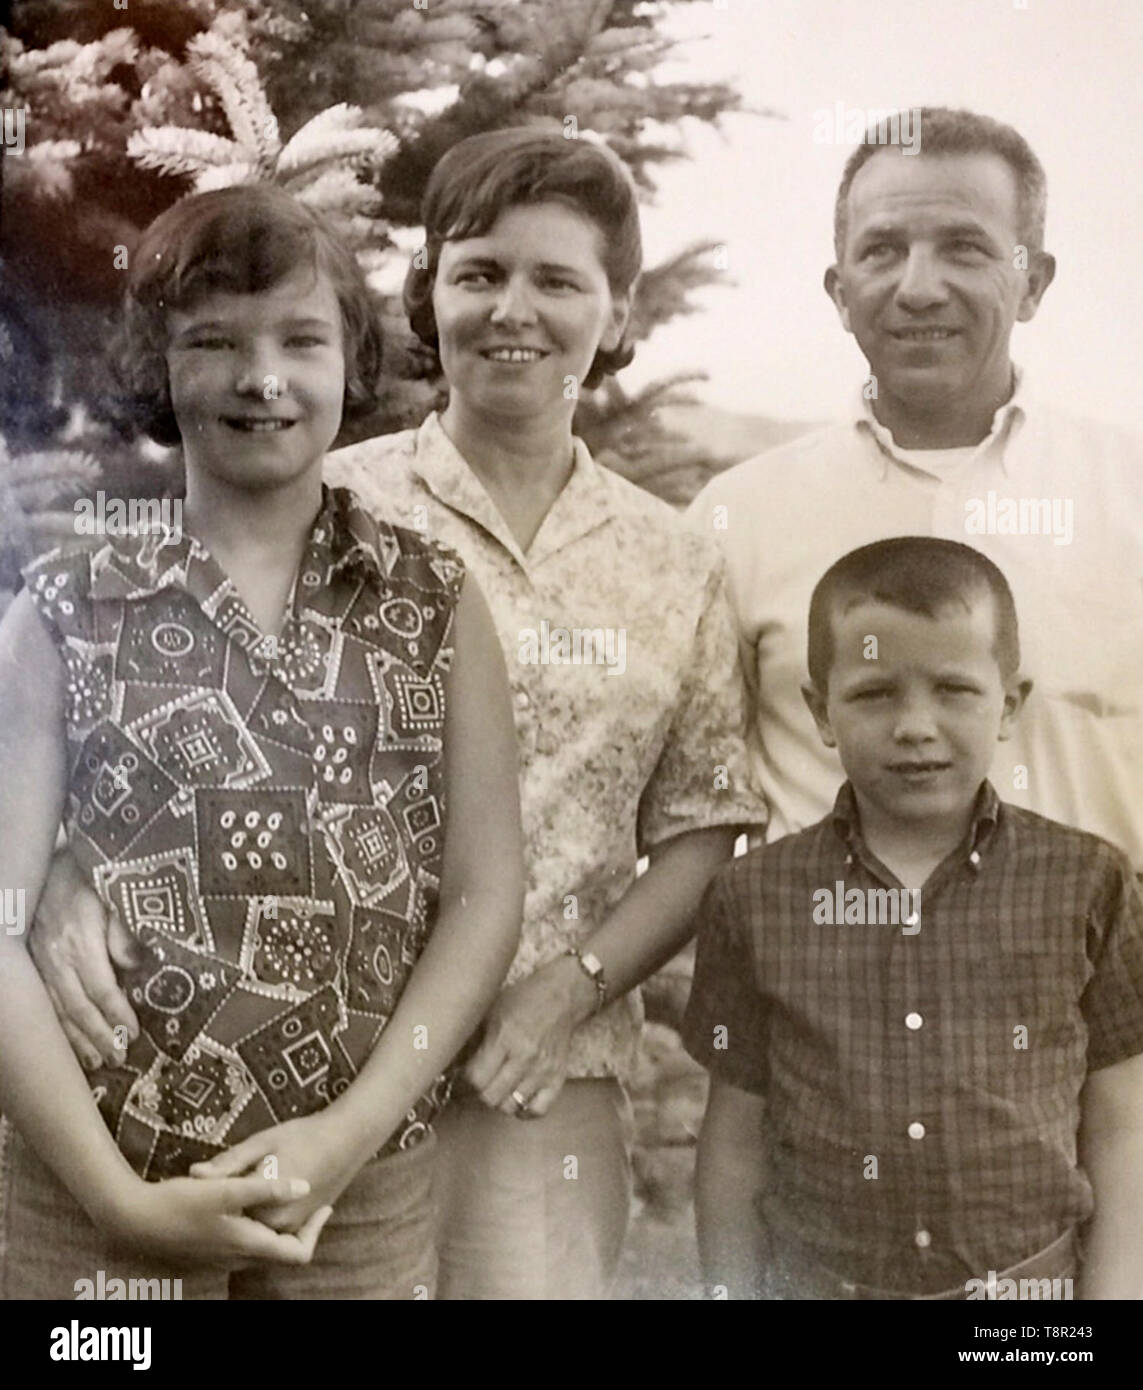 (190514) -- NEW YORK, May 14, 2019 (Xinhua) -- James E. Bryant (R, rear), his wife Dorothy Bryant (L, rear), daughter Babs Bryant (L, front) and son James Bryant are pictured in Colorado, the United States, 1964. James Bryant will never forget the day when his 93-year-old father went back to his bedroom and came back with a flight brief case containing papers related to the training and assignments he took as a U.S. Flying Tiger pilot during the World War II. As a 'remarkable' yet 'humble' man and a loving father, James E. Bryant did not show any detailed evidence about his war experience unt Stock Photo